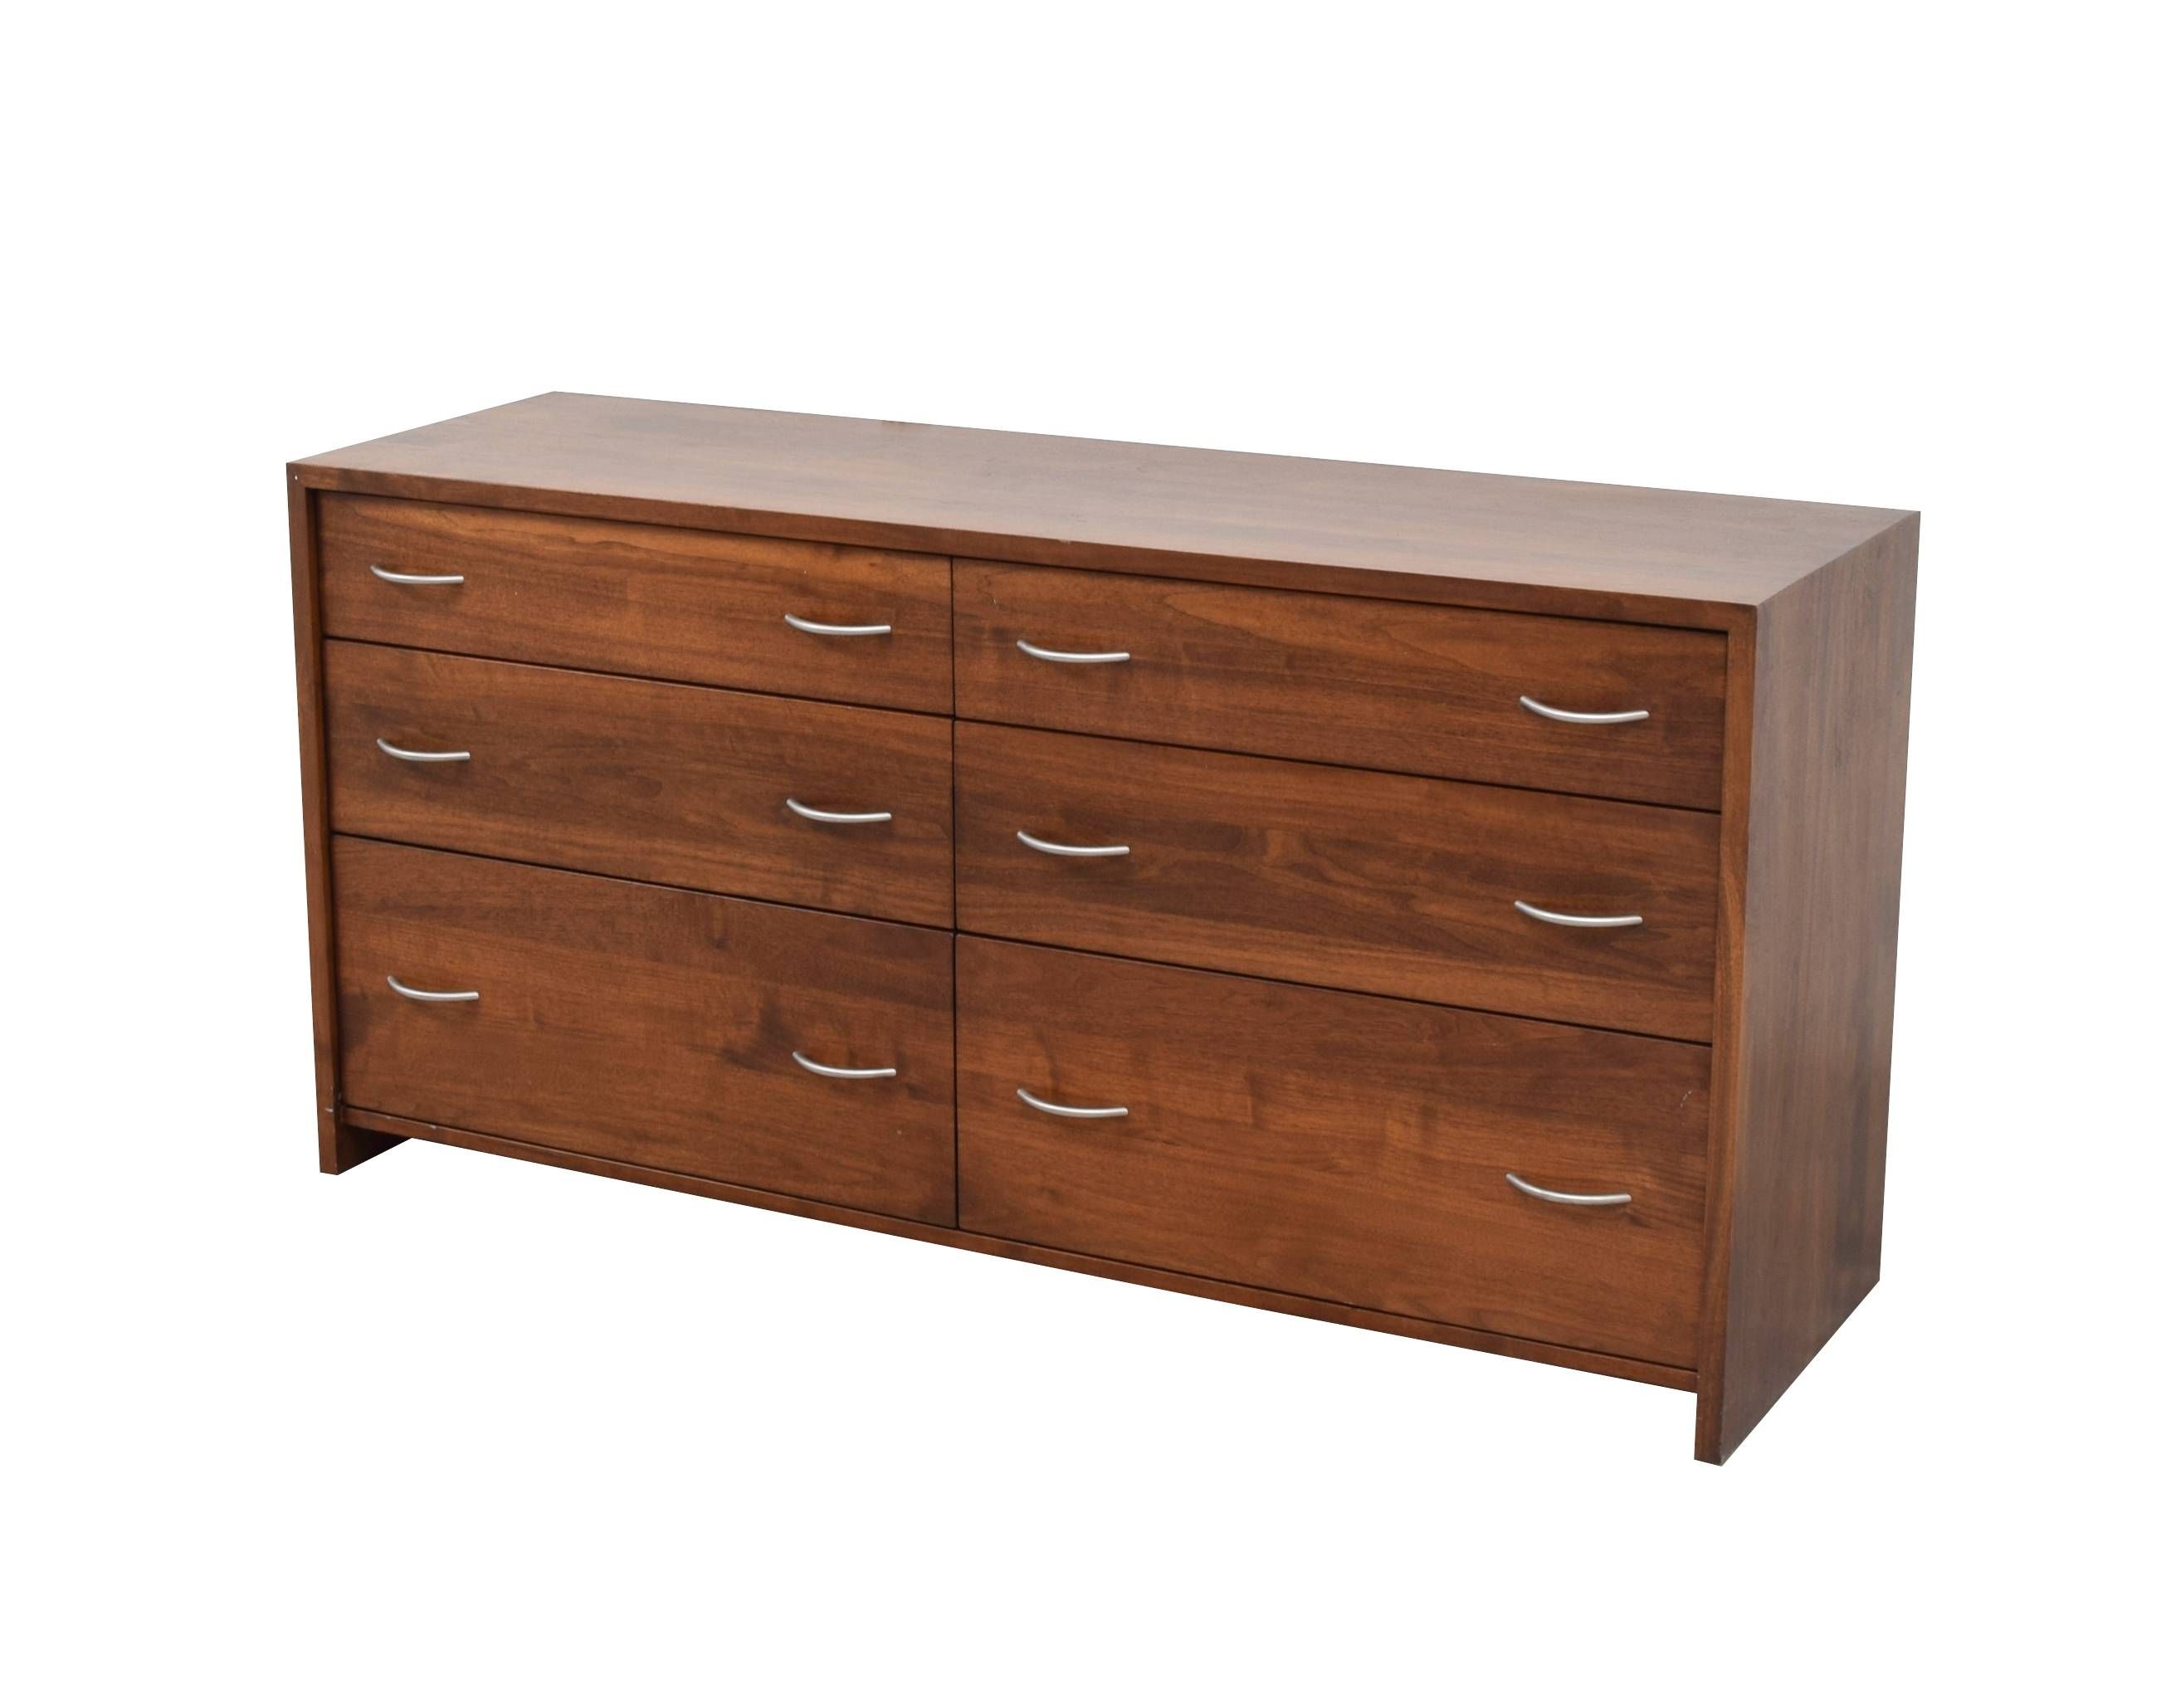 55% Off – Custom Oak Six Drawer Dresser / Storage Inside Second Hand Dressers And Sideboards (View 11 of 15)